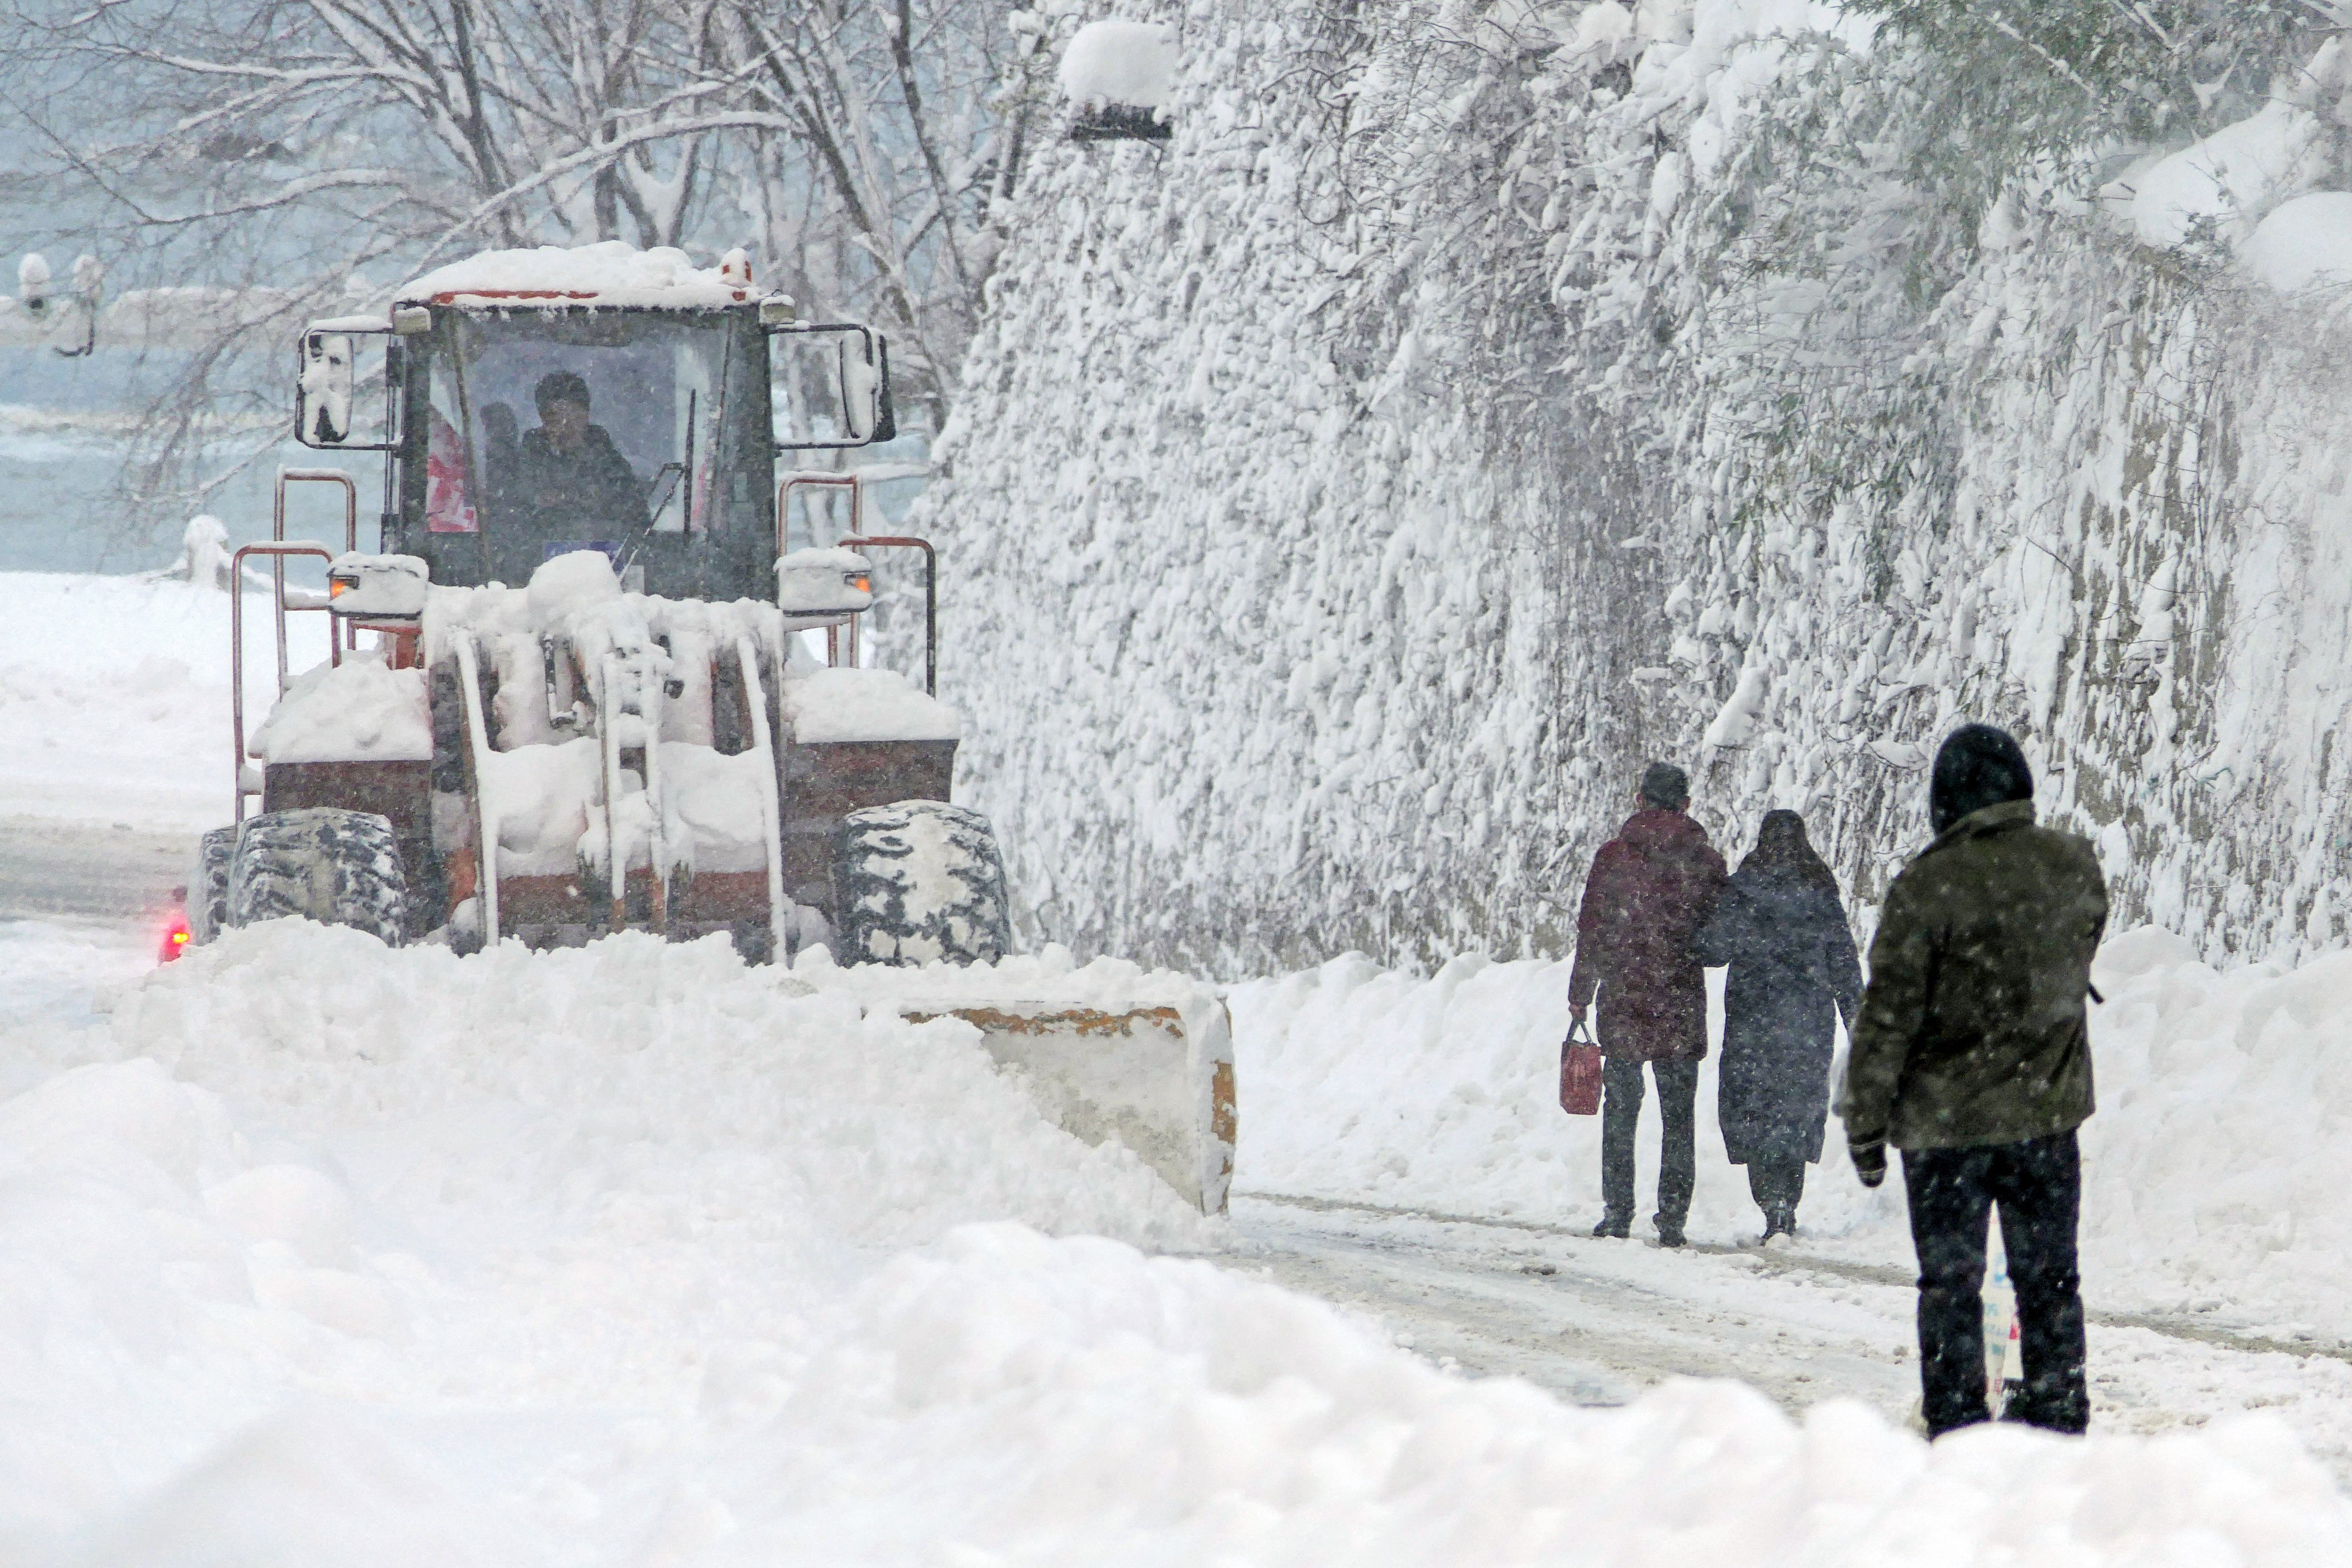 File image: A snowplow clears snow during snowfall in Yantai, in China’s eastern Shandong province